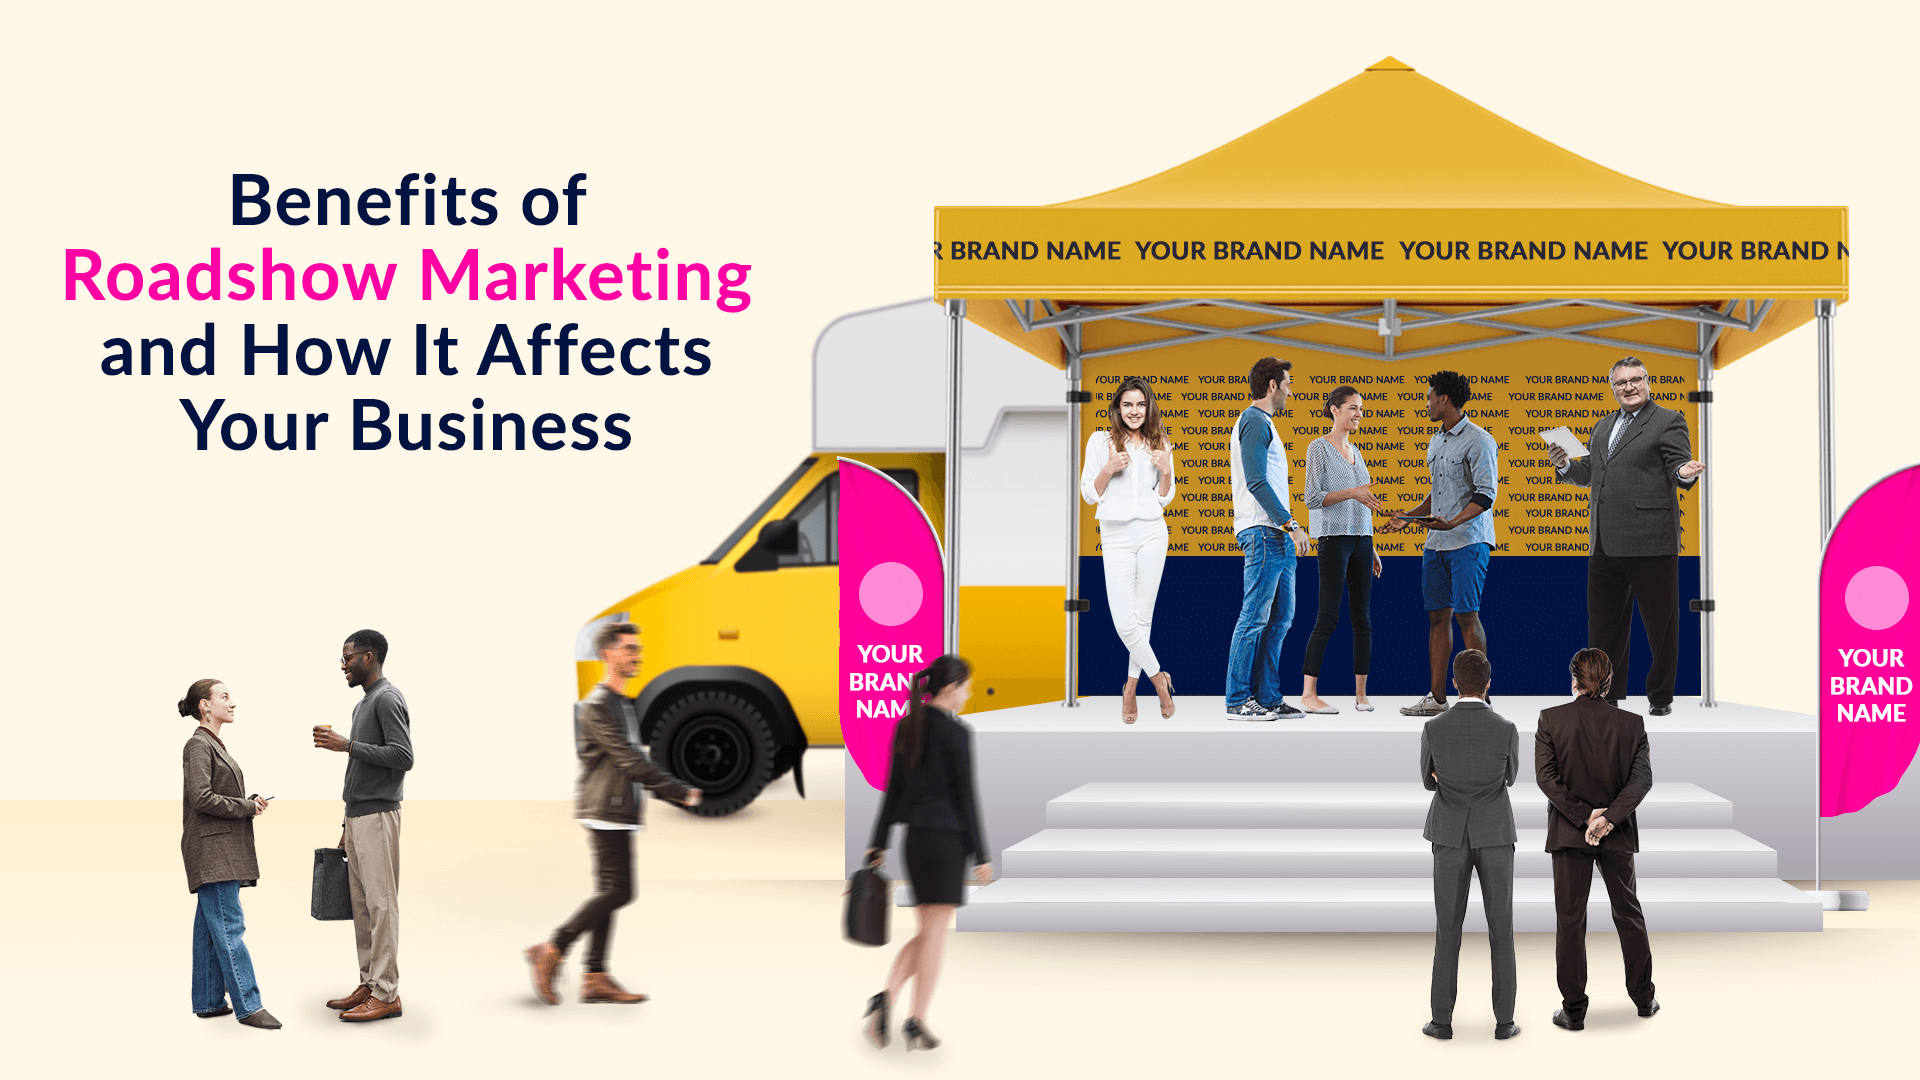 Benefits of roadshow marketing and how it affects your business